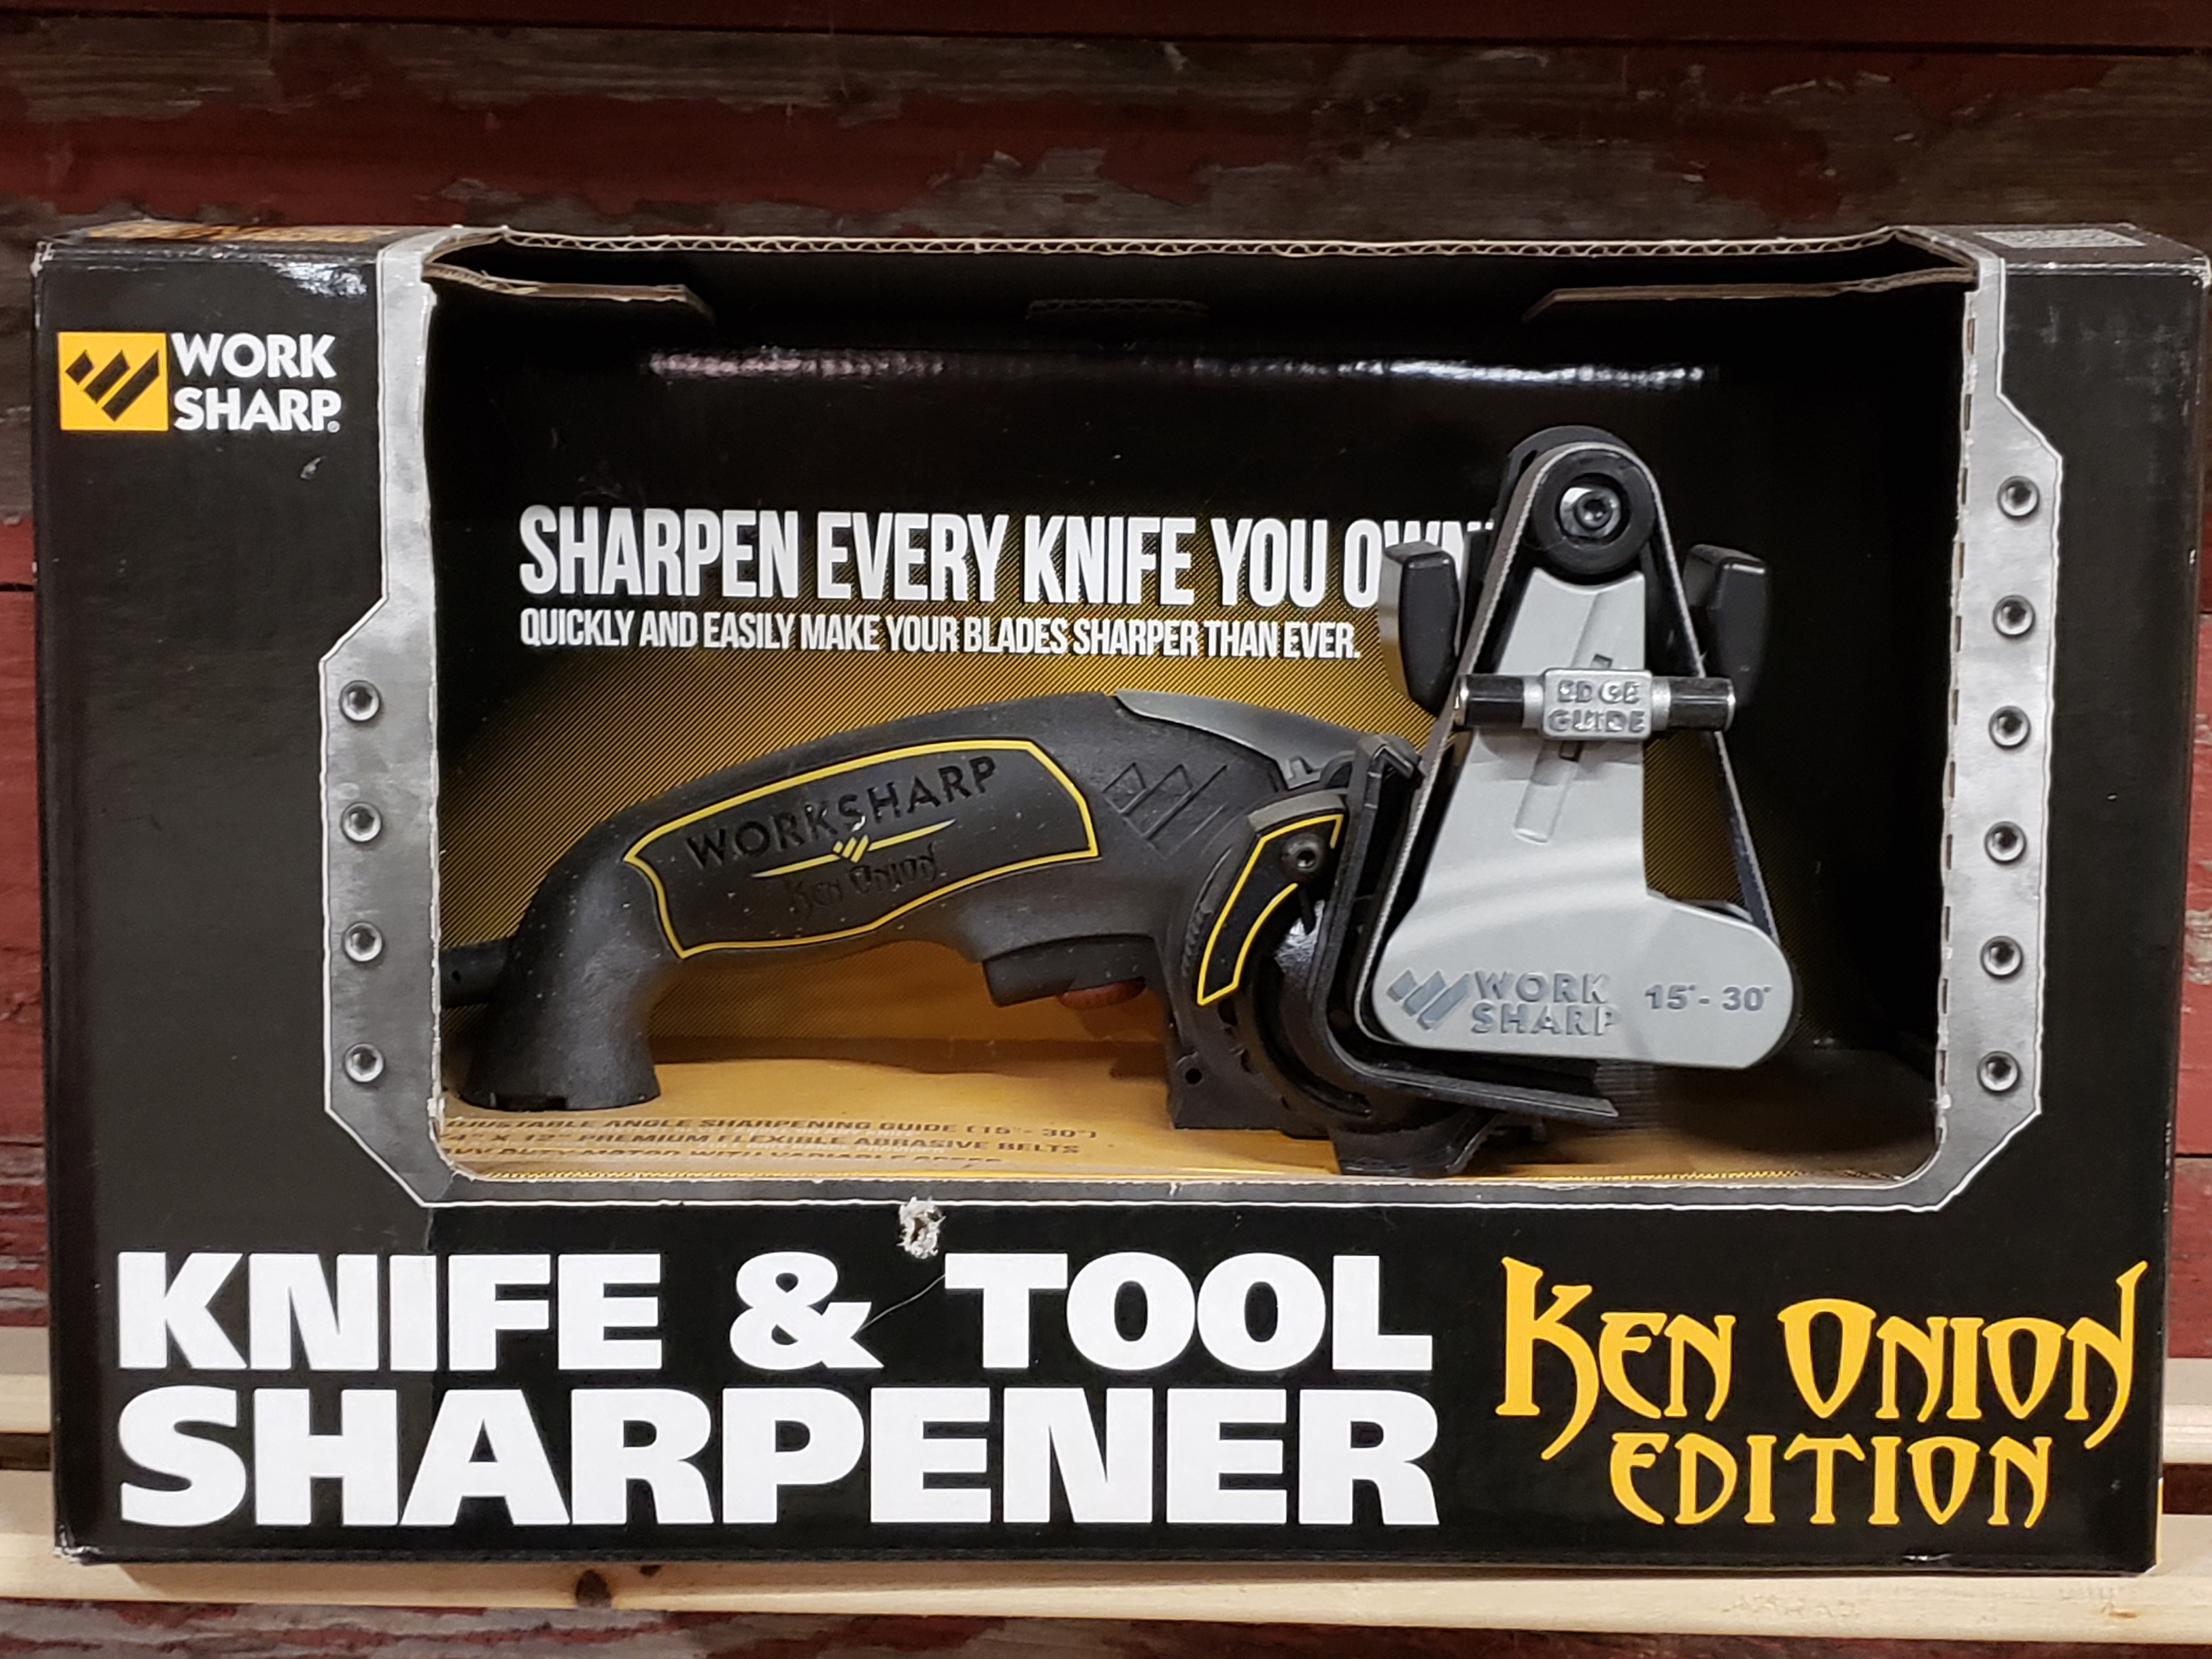 Ken Onion Edition Knife and Tool Sharpener 